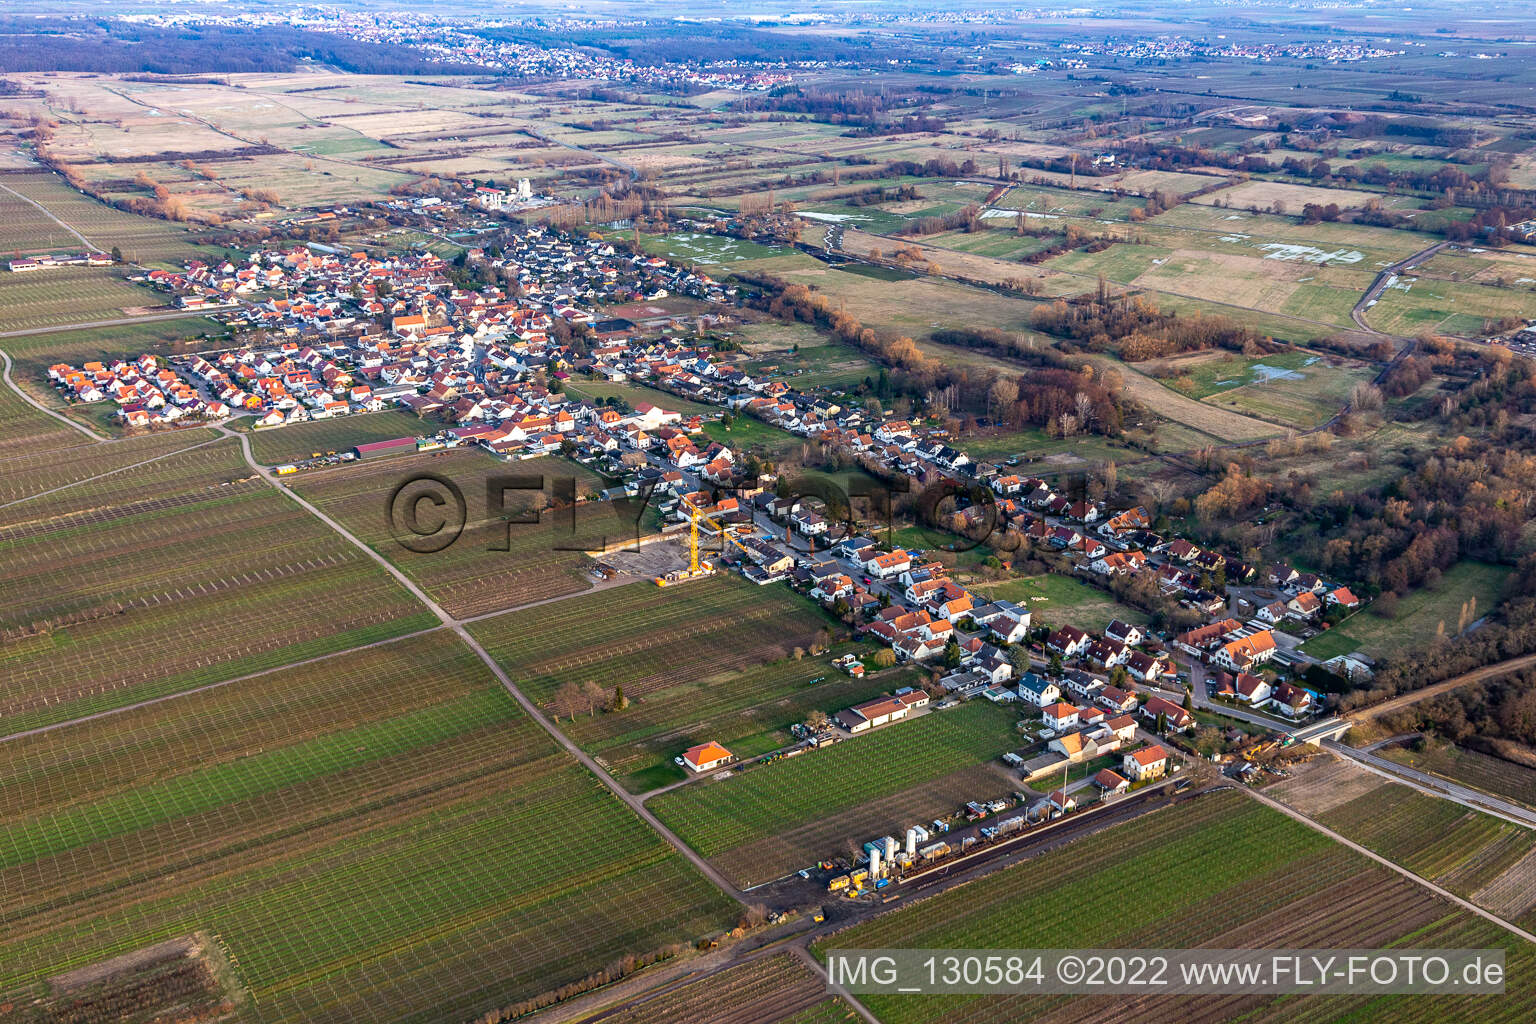 Erpolzheim in the state Rhineland-Palatinate, Germany seen from above